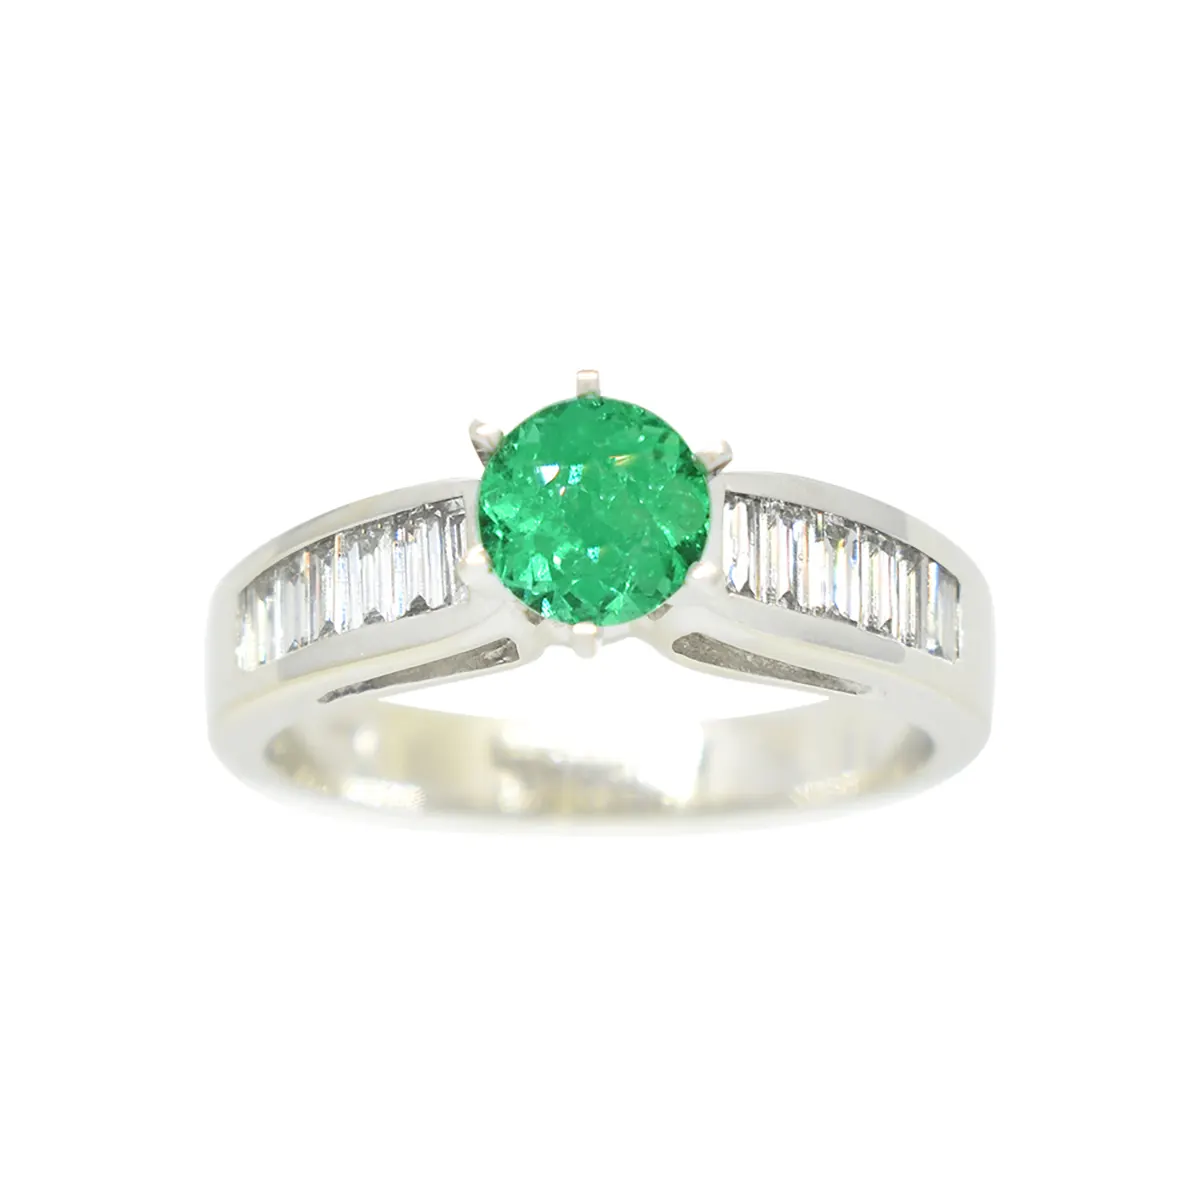 Emerald ring in 14K white gold with 0.66 Ct. round cut natural Colombian emerald and 12 baguette cut diamonds in 0.53 Ct. t.w.